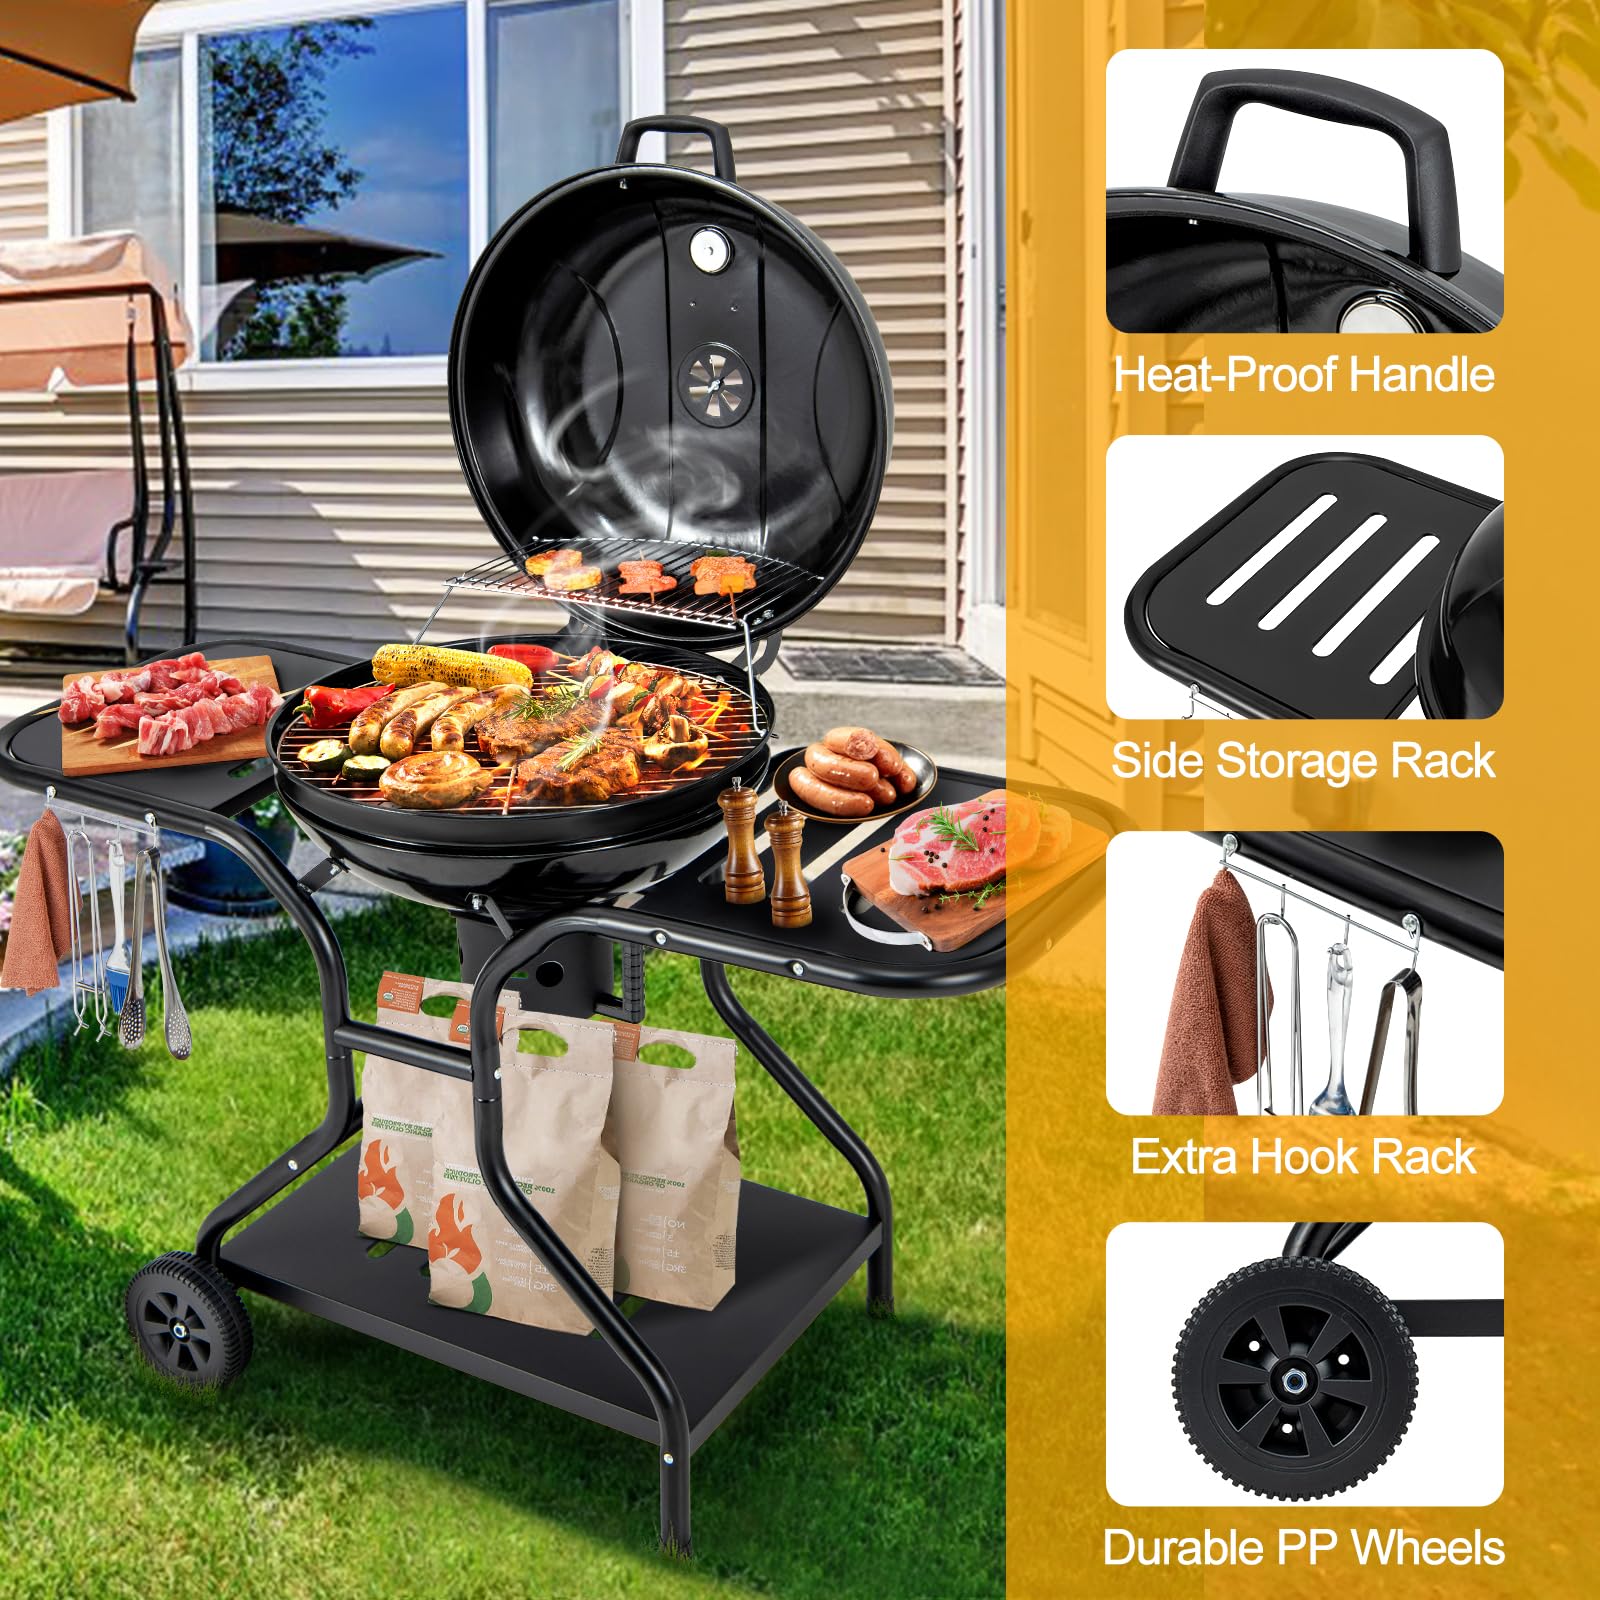 Giantex Kettle Charcoal Grill 22-Inch, Porcelain Enamel Body and Lid, 2 Side Tables with 4 Hooks, Storage Shelf